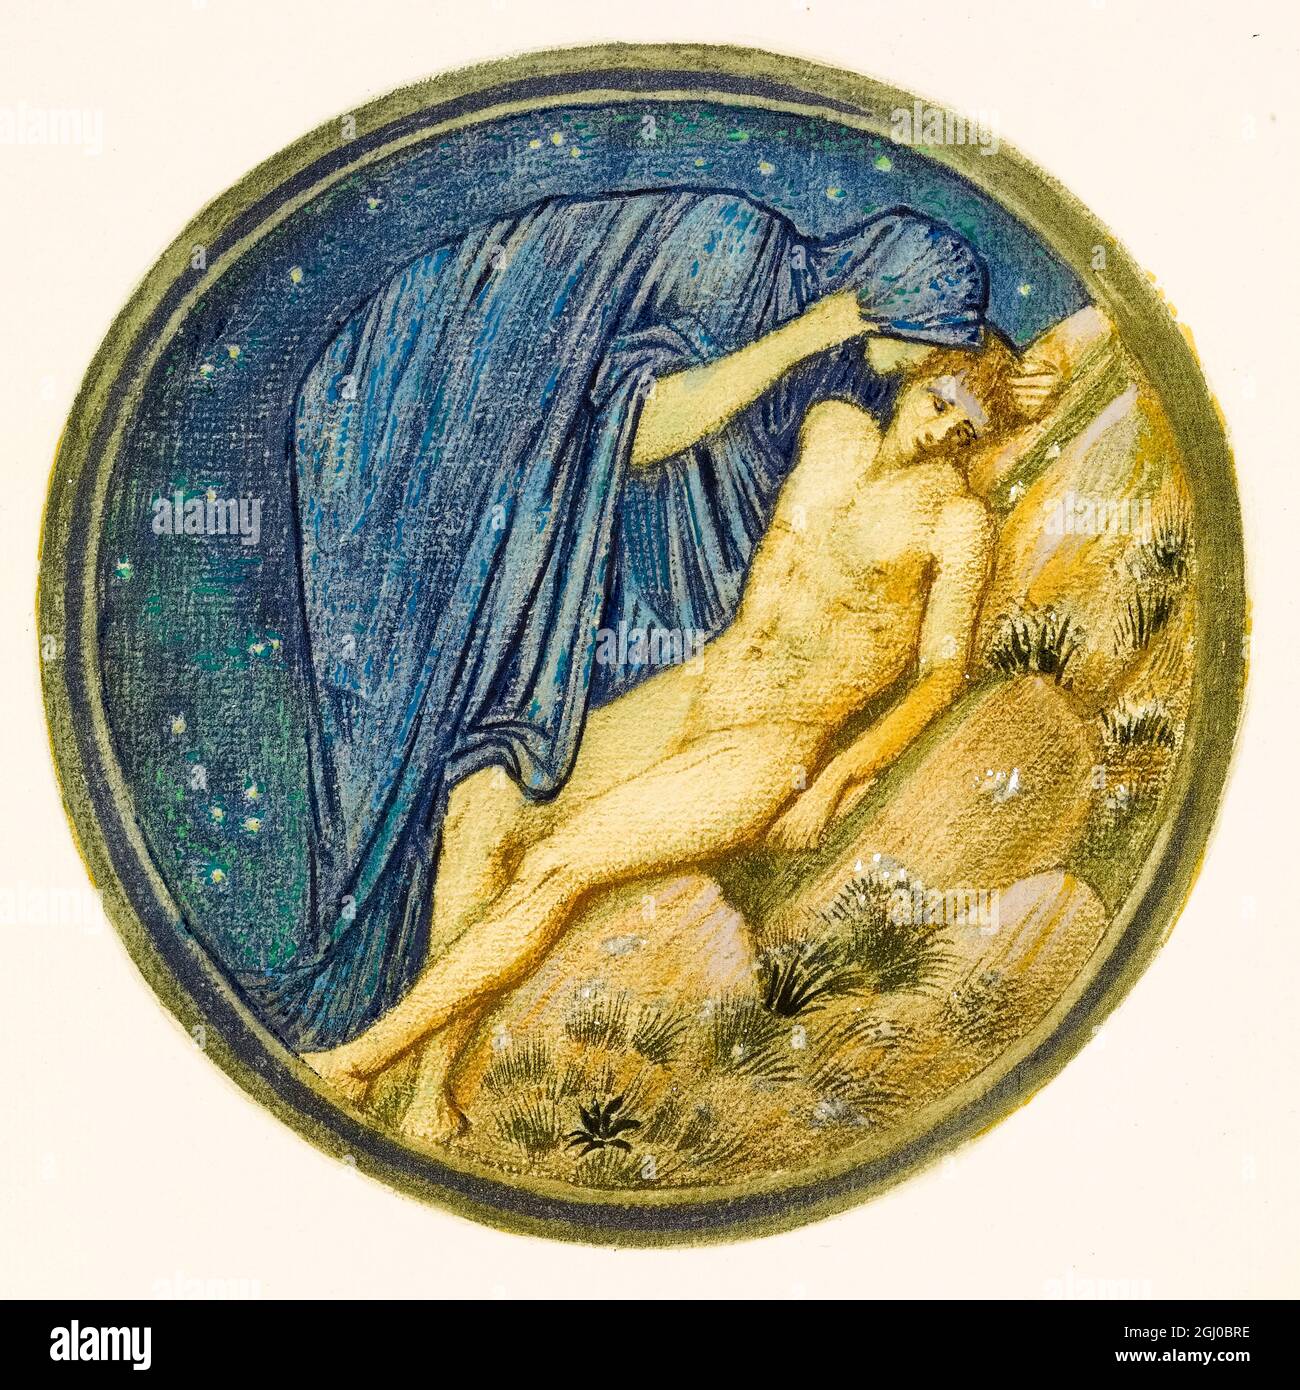 Edward Burne Jones, The Flower Book: Day and Night, stampa, 1905 Foto Stock